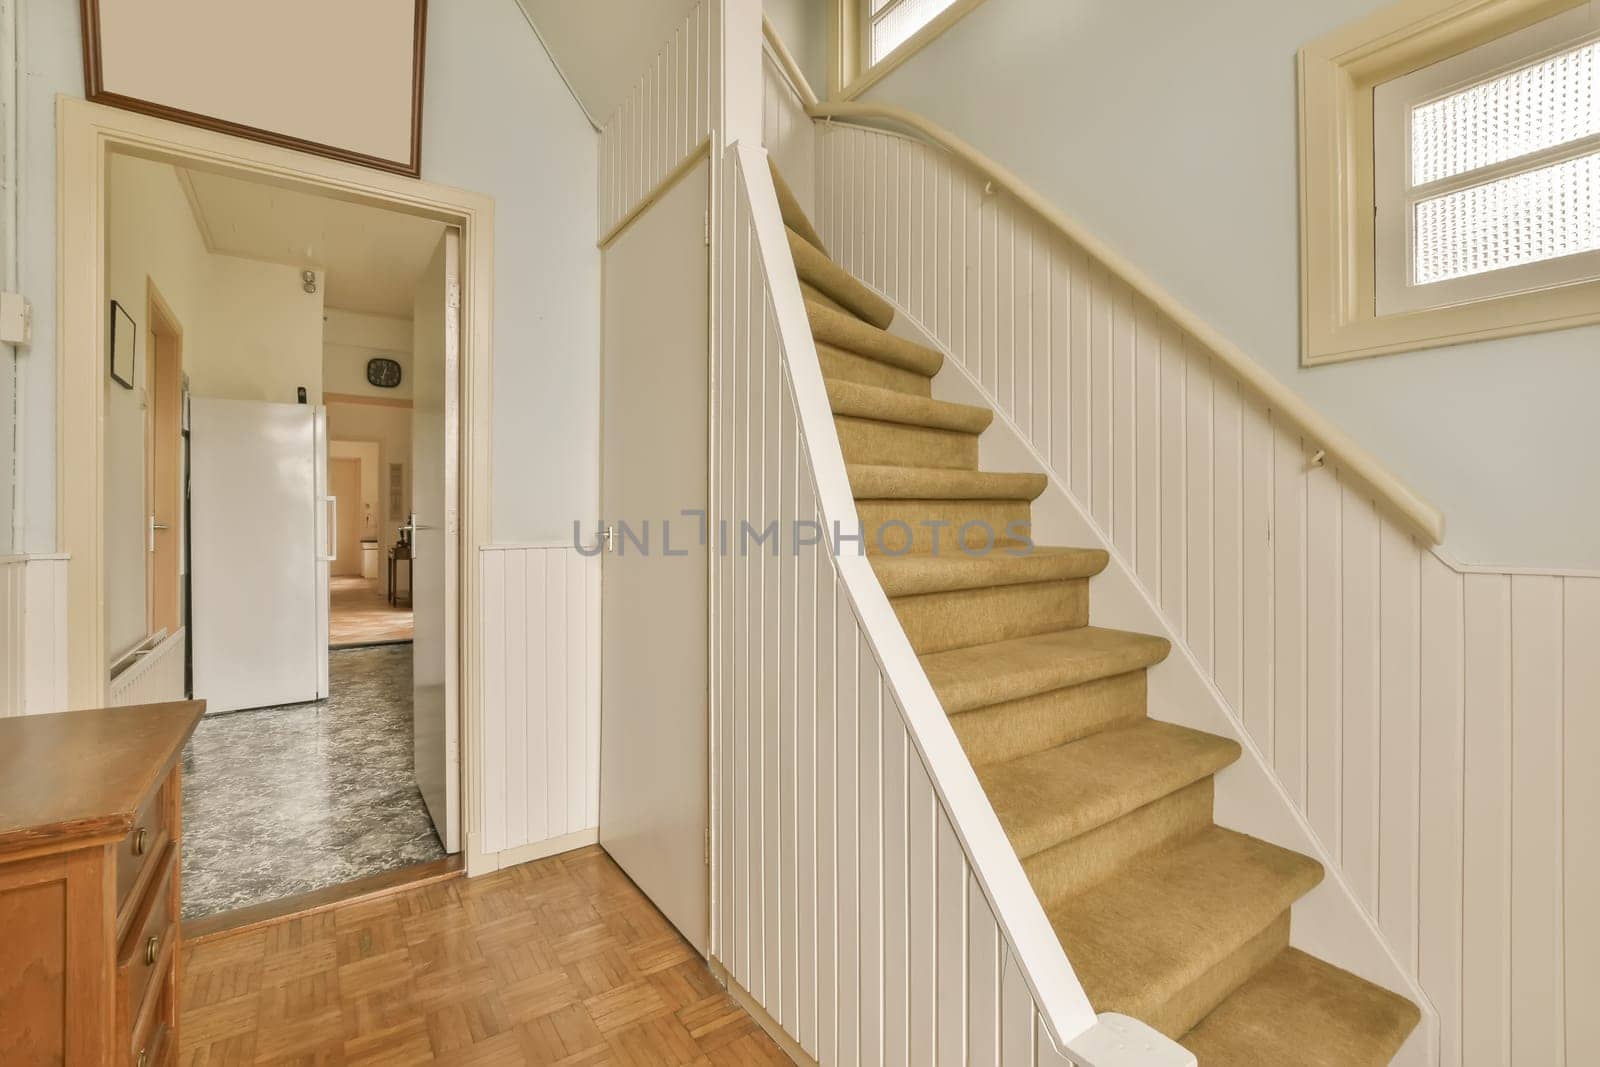 a staircase leading up to the second floor in a new home with wood floors and white panelling on the walls